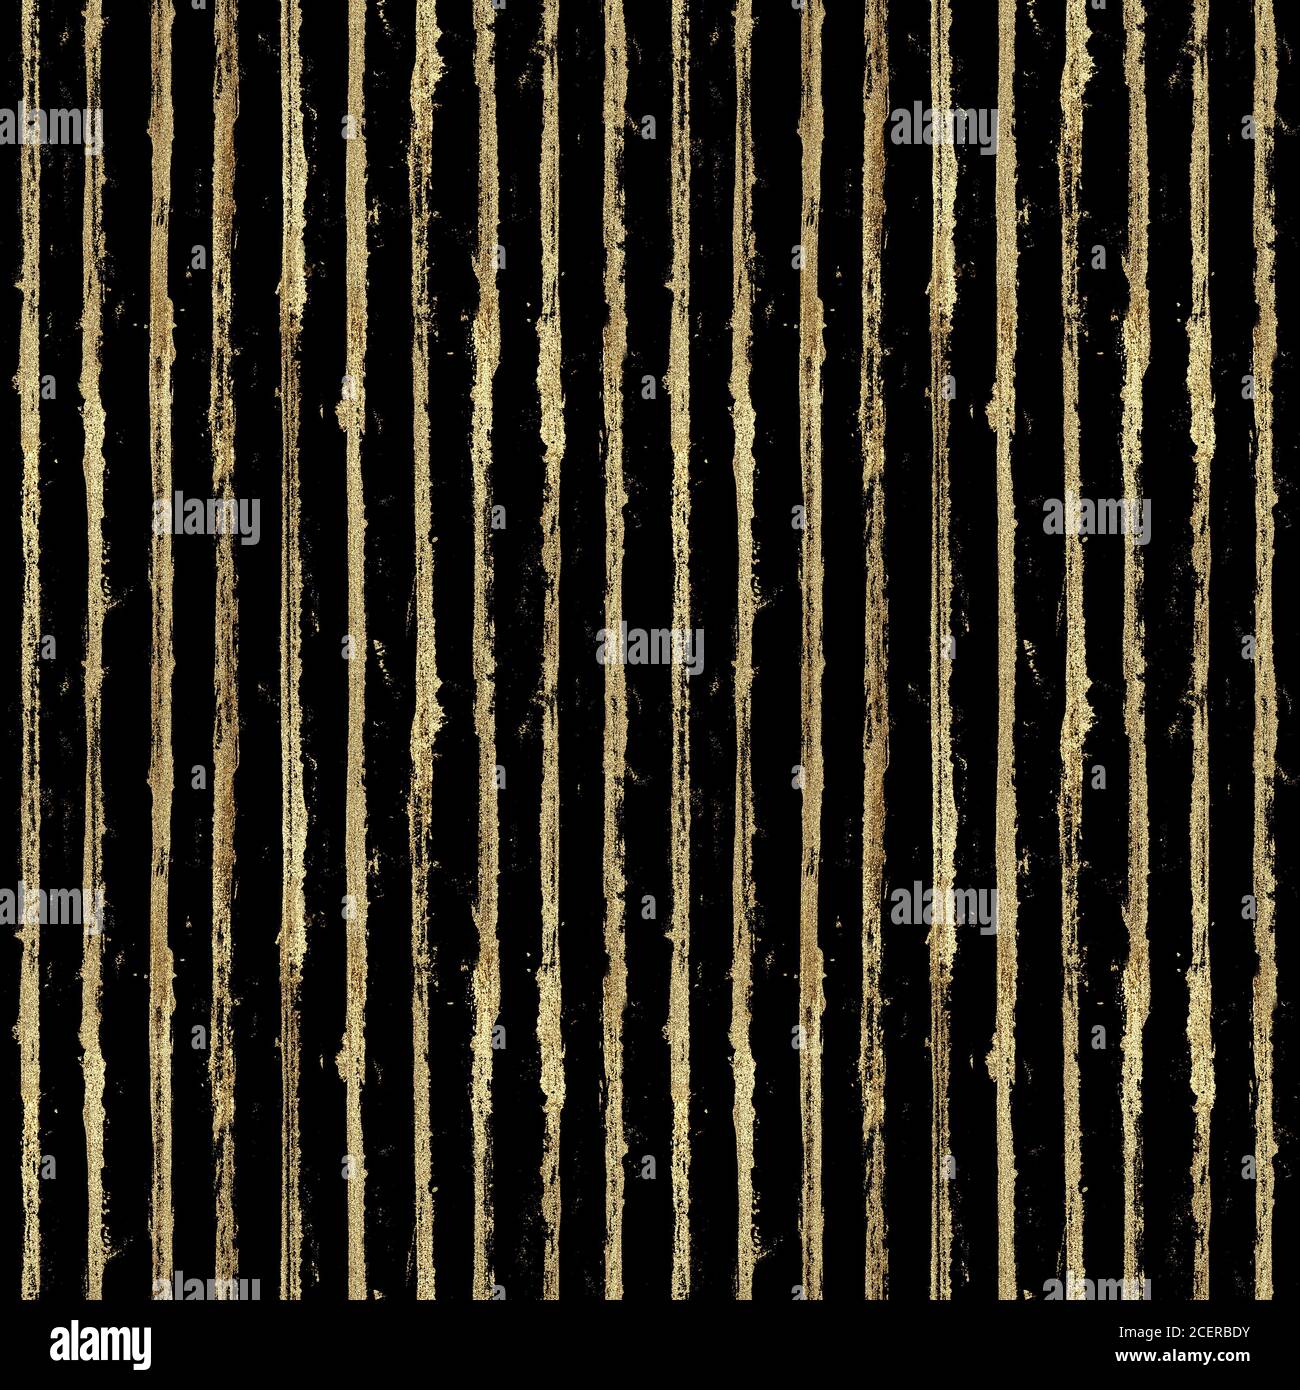 Gold gliterring shining stripe grunge seamless pattern. Golden stripes on  black background. Hand drawn striped texture. Print for textile, fabric,  wal Stock Photo - Alamy